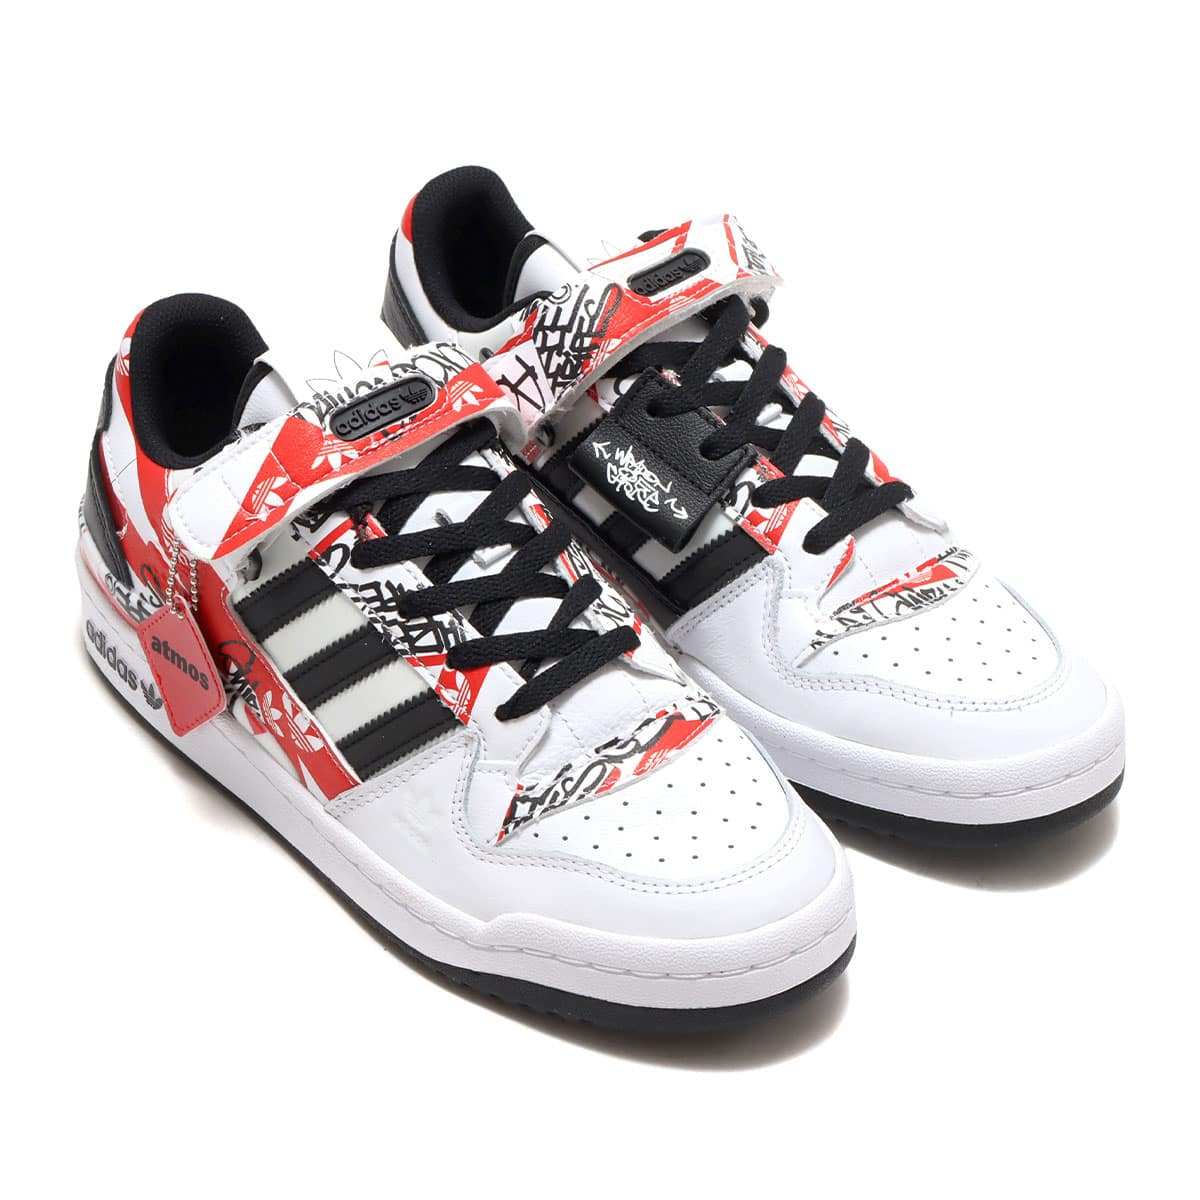 adidas FORUM LOW GRAFFITI atmos FOOTWEAR WHITE/CORE BLACK/ACTIVE RED 21FW-S_photo_large